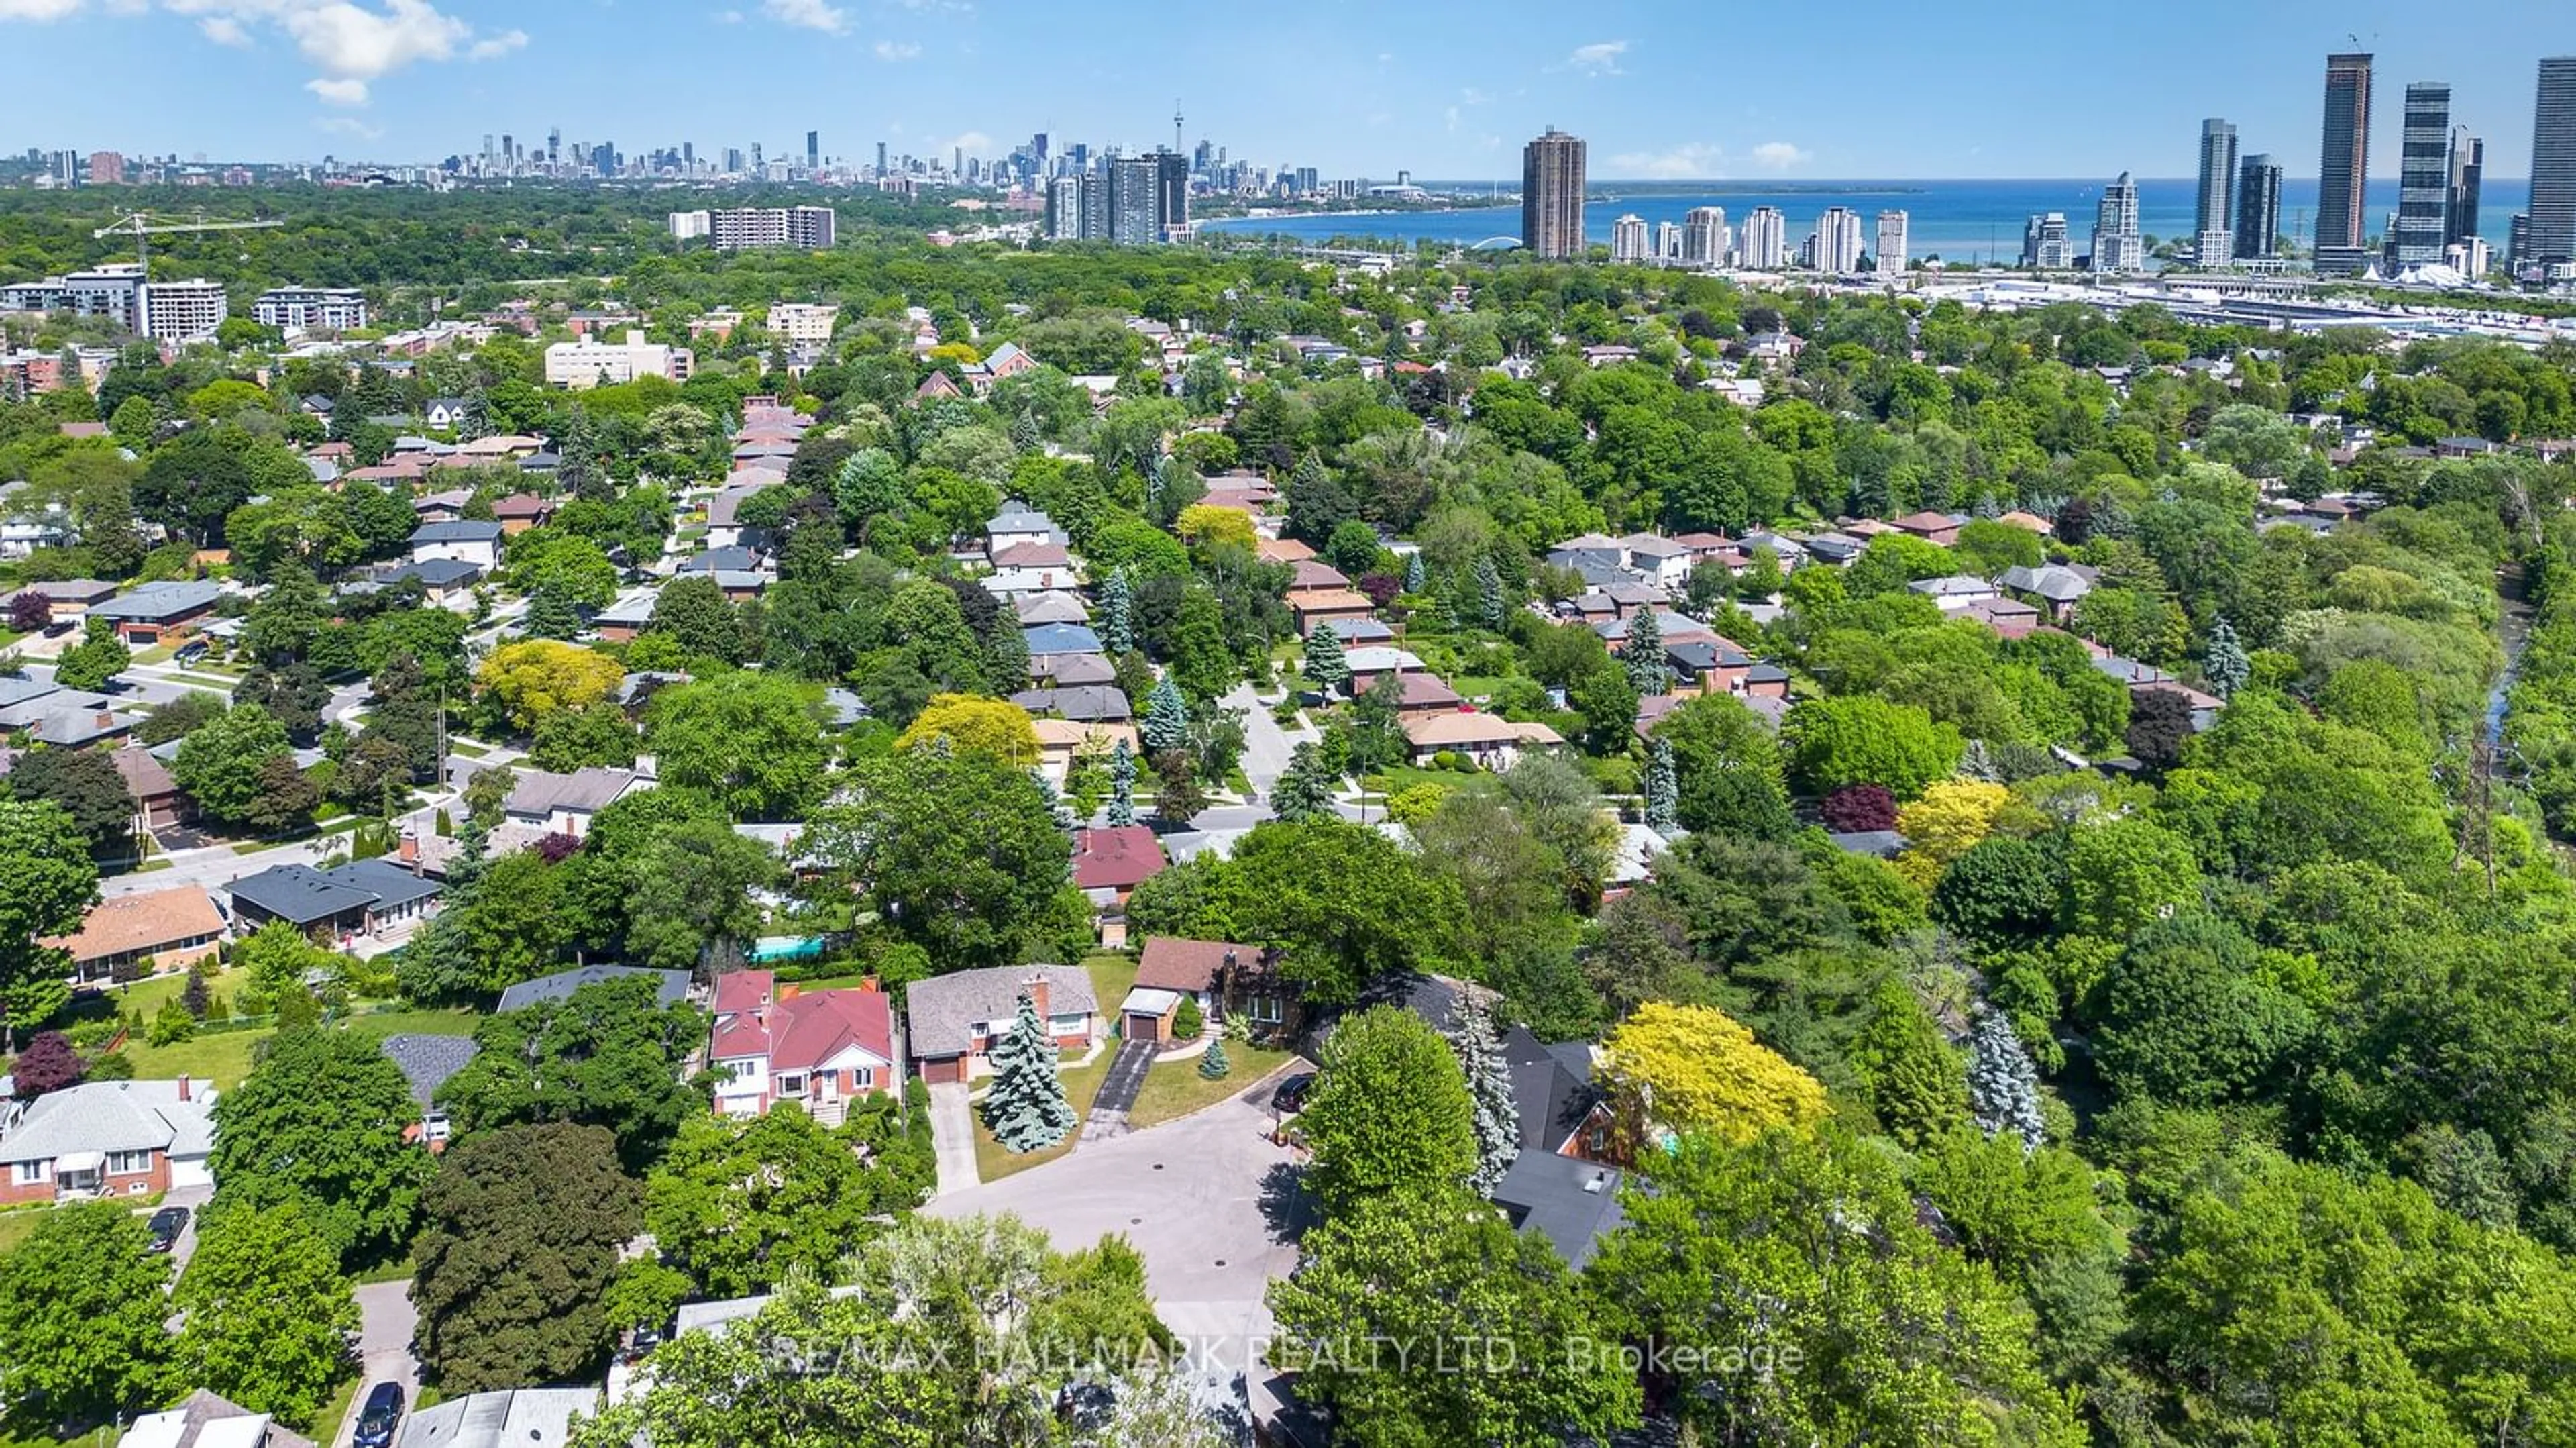 Lakeview for 31 Beaucourt Rd, Toronto Ontario M8Y 3G1